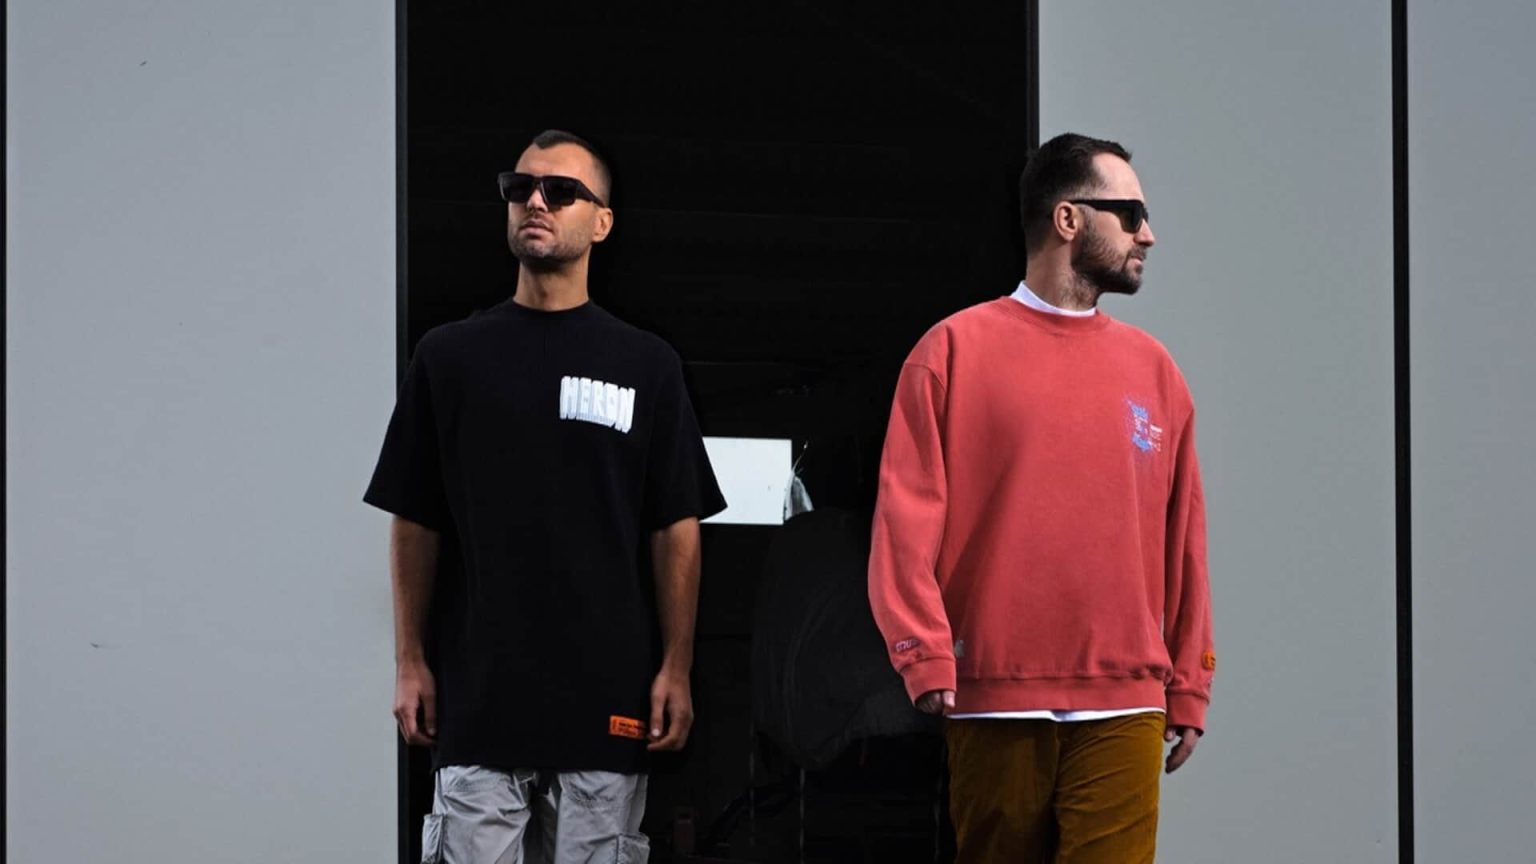 ARTBAT continue their unstoppable rise with hour-long mix for Apple Music